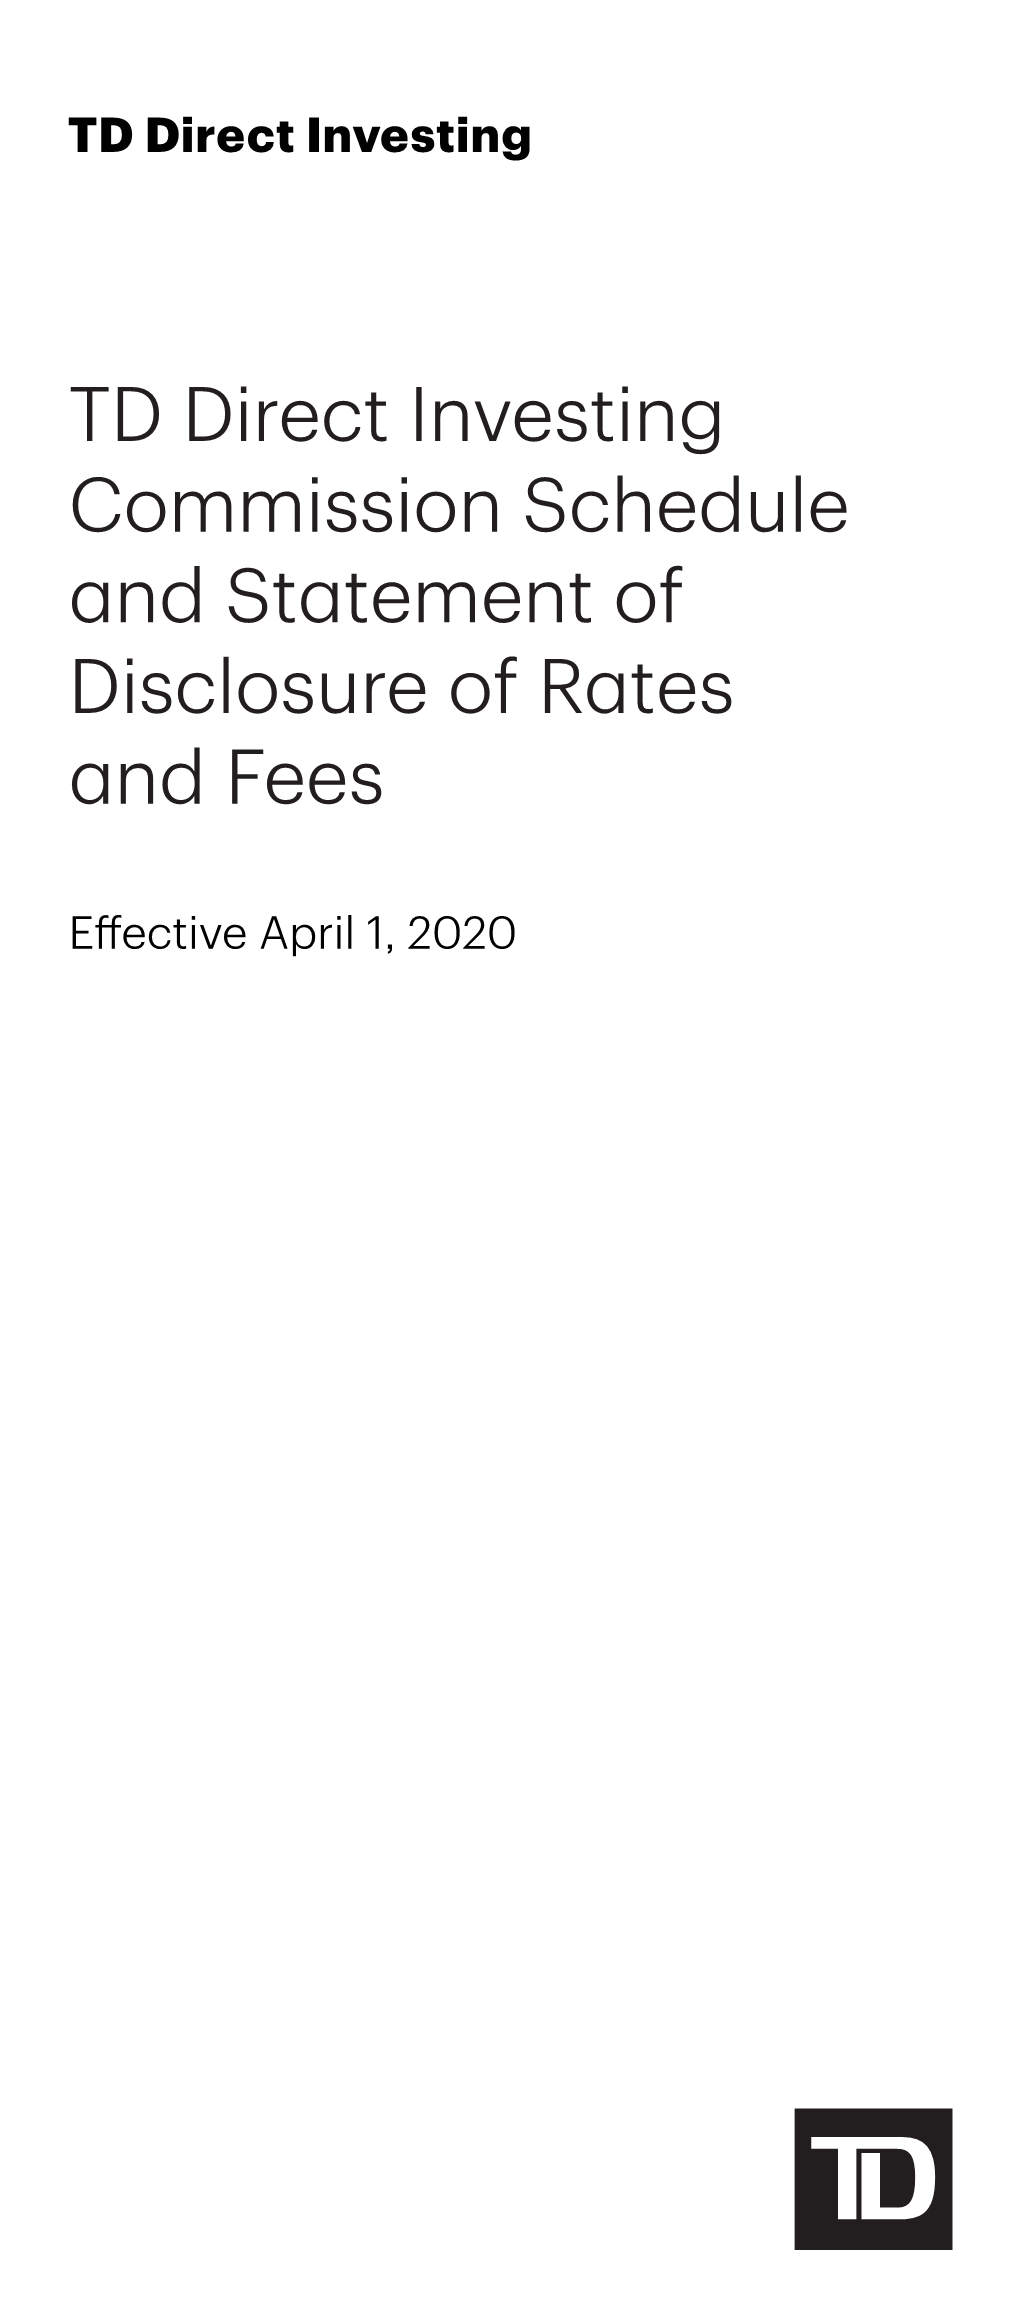 TD Direct Investing Commission Schedule and Statement of Disclosure of Rates and Fees